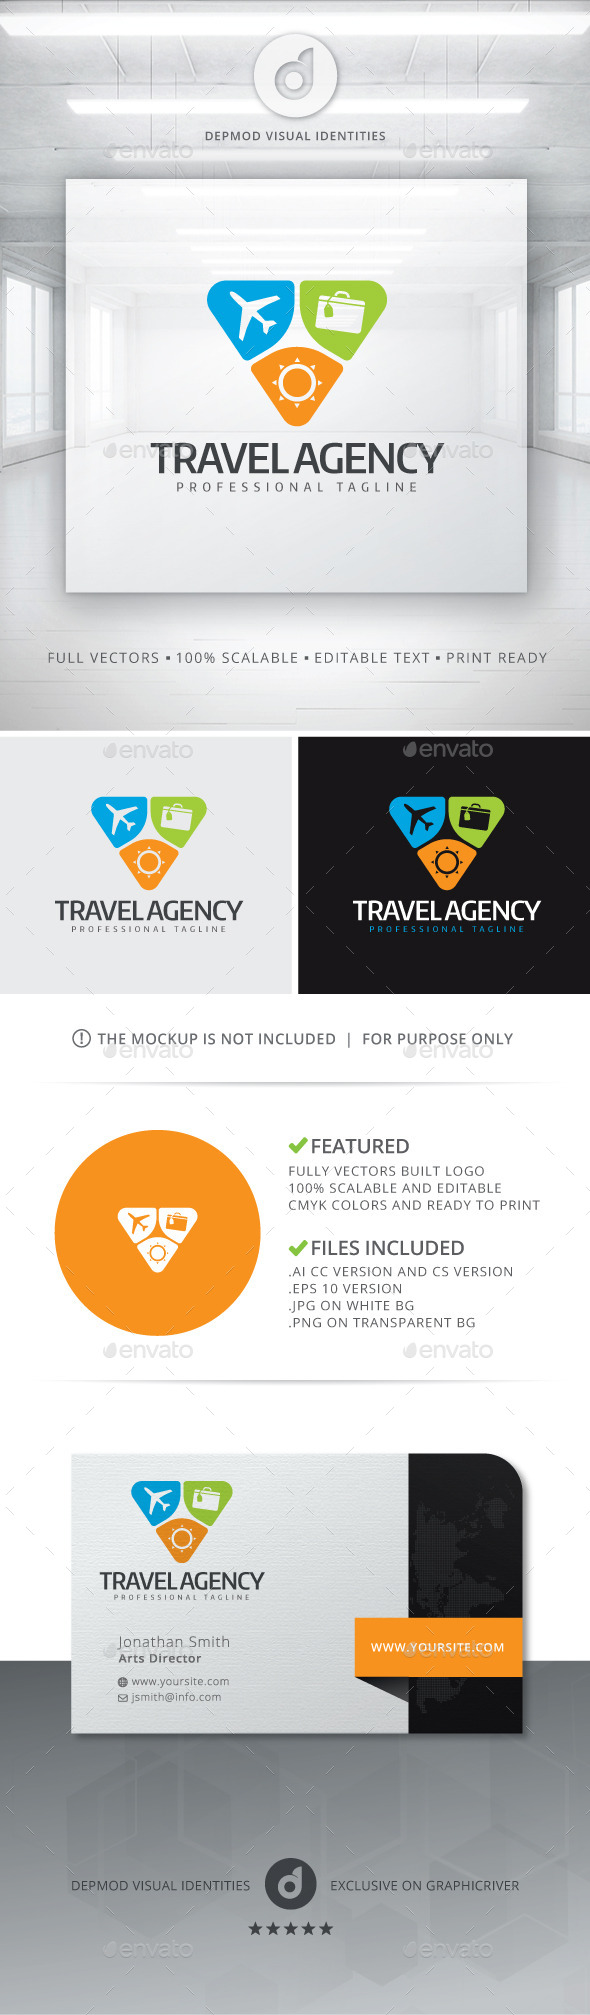 Travel Agency Logo by Opaq | GraphicRiver